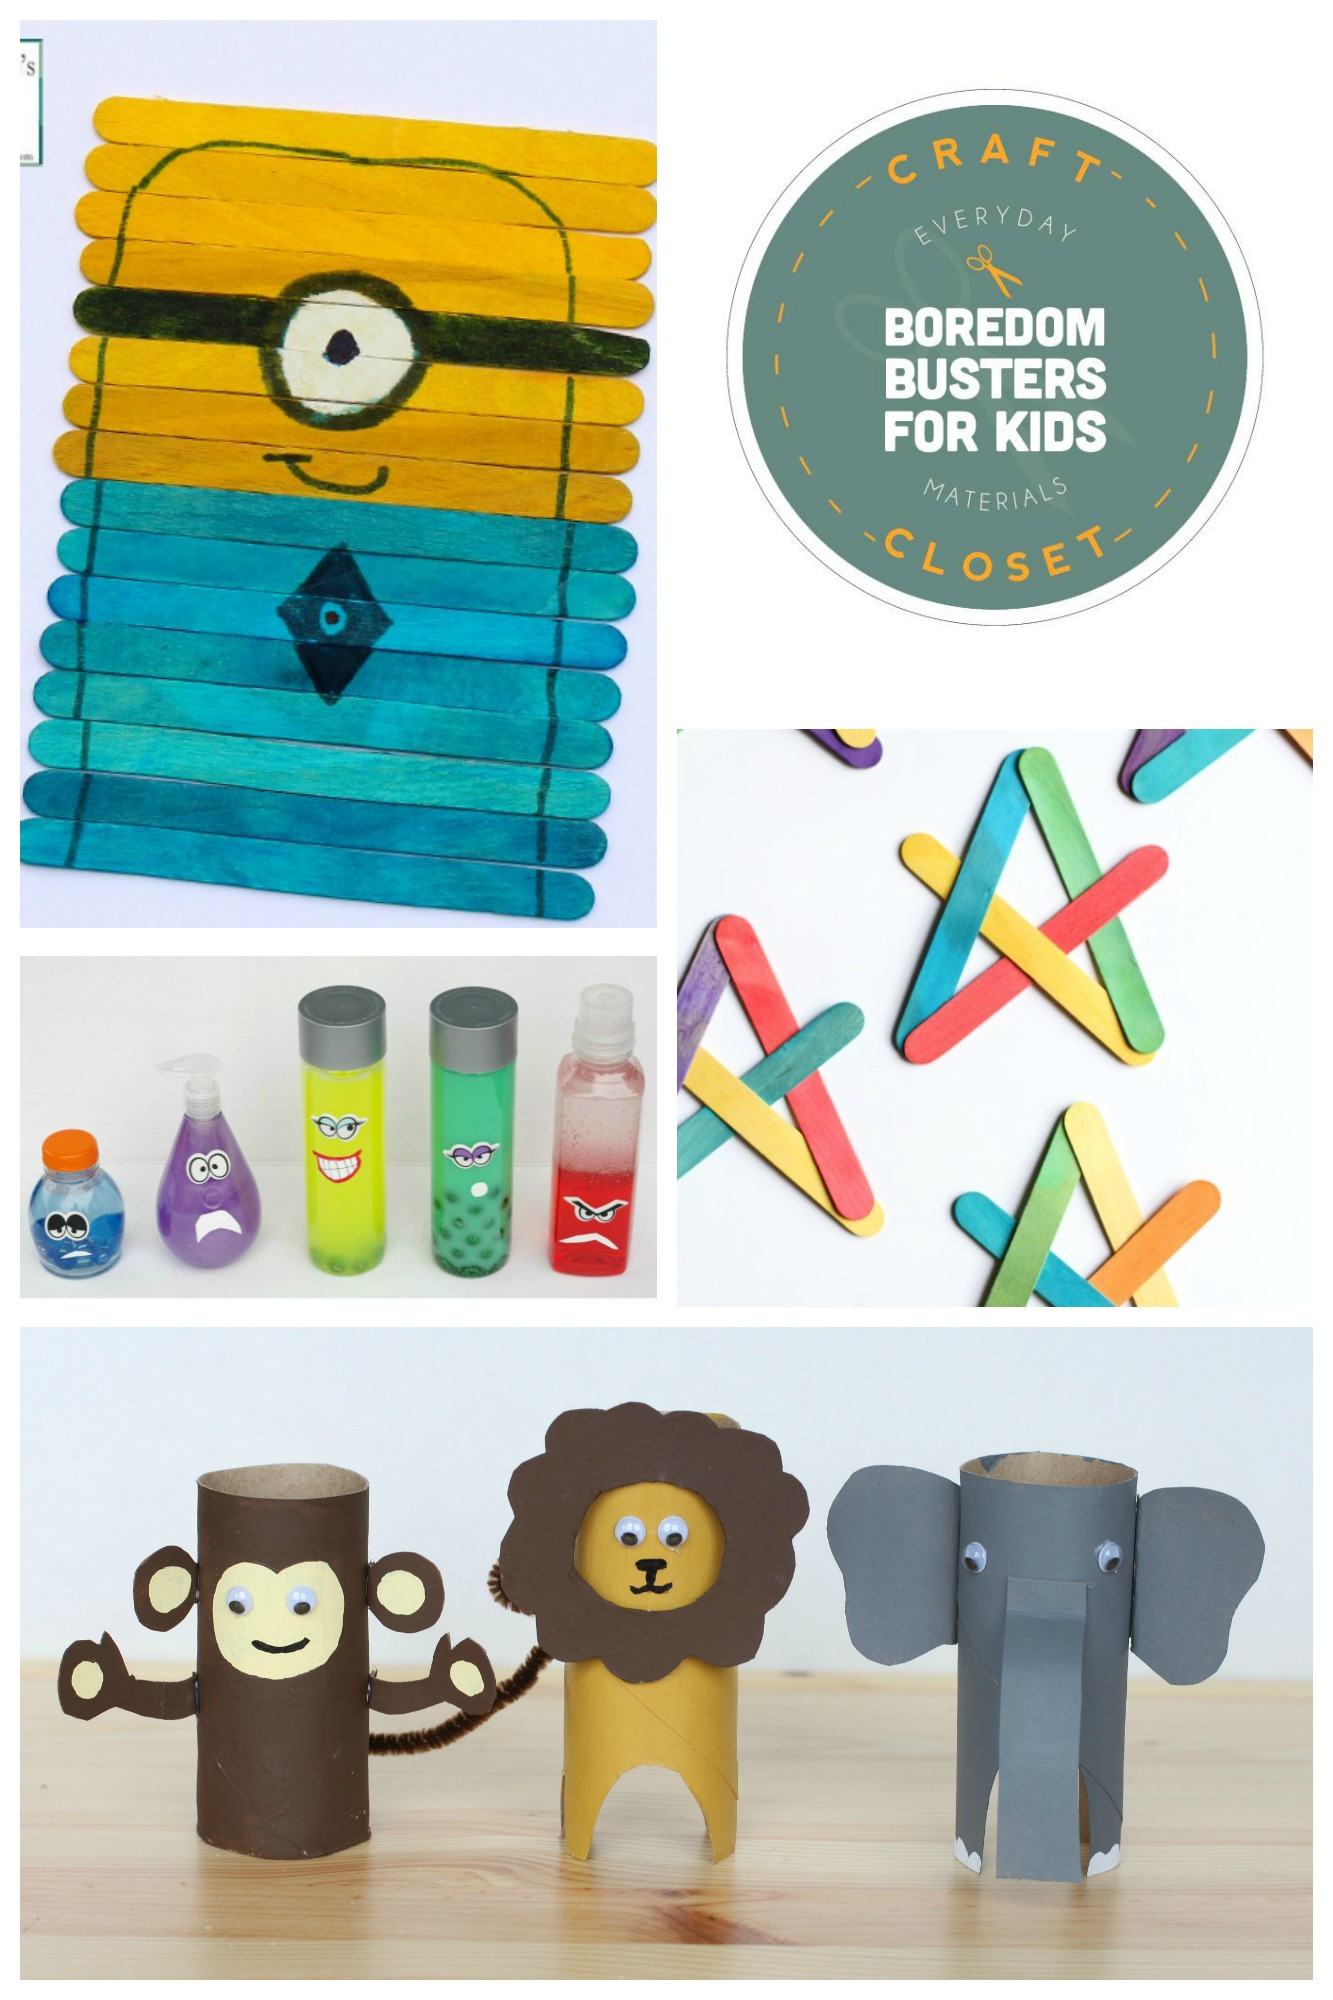 Crafts And Activities For Toddlers
 25 Crafts and Activities for Kids Using Everyday Materials